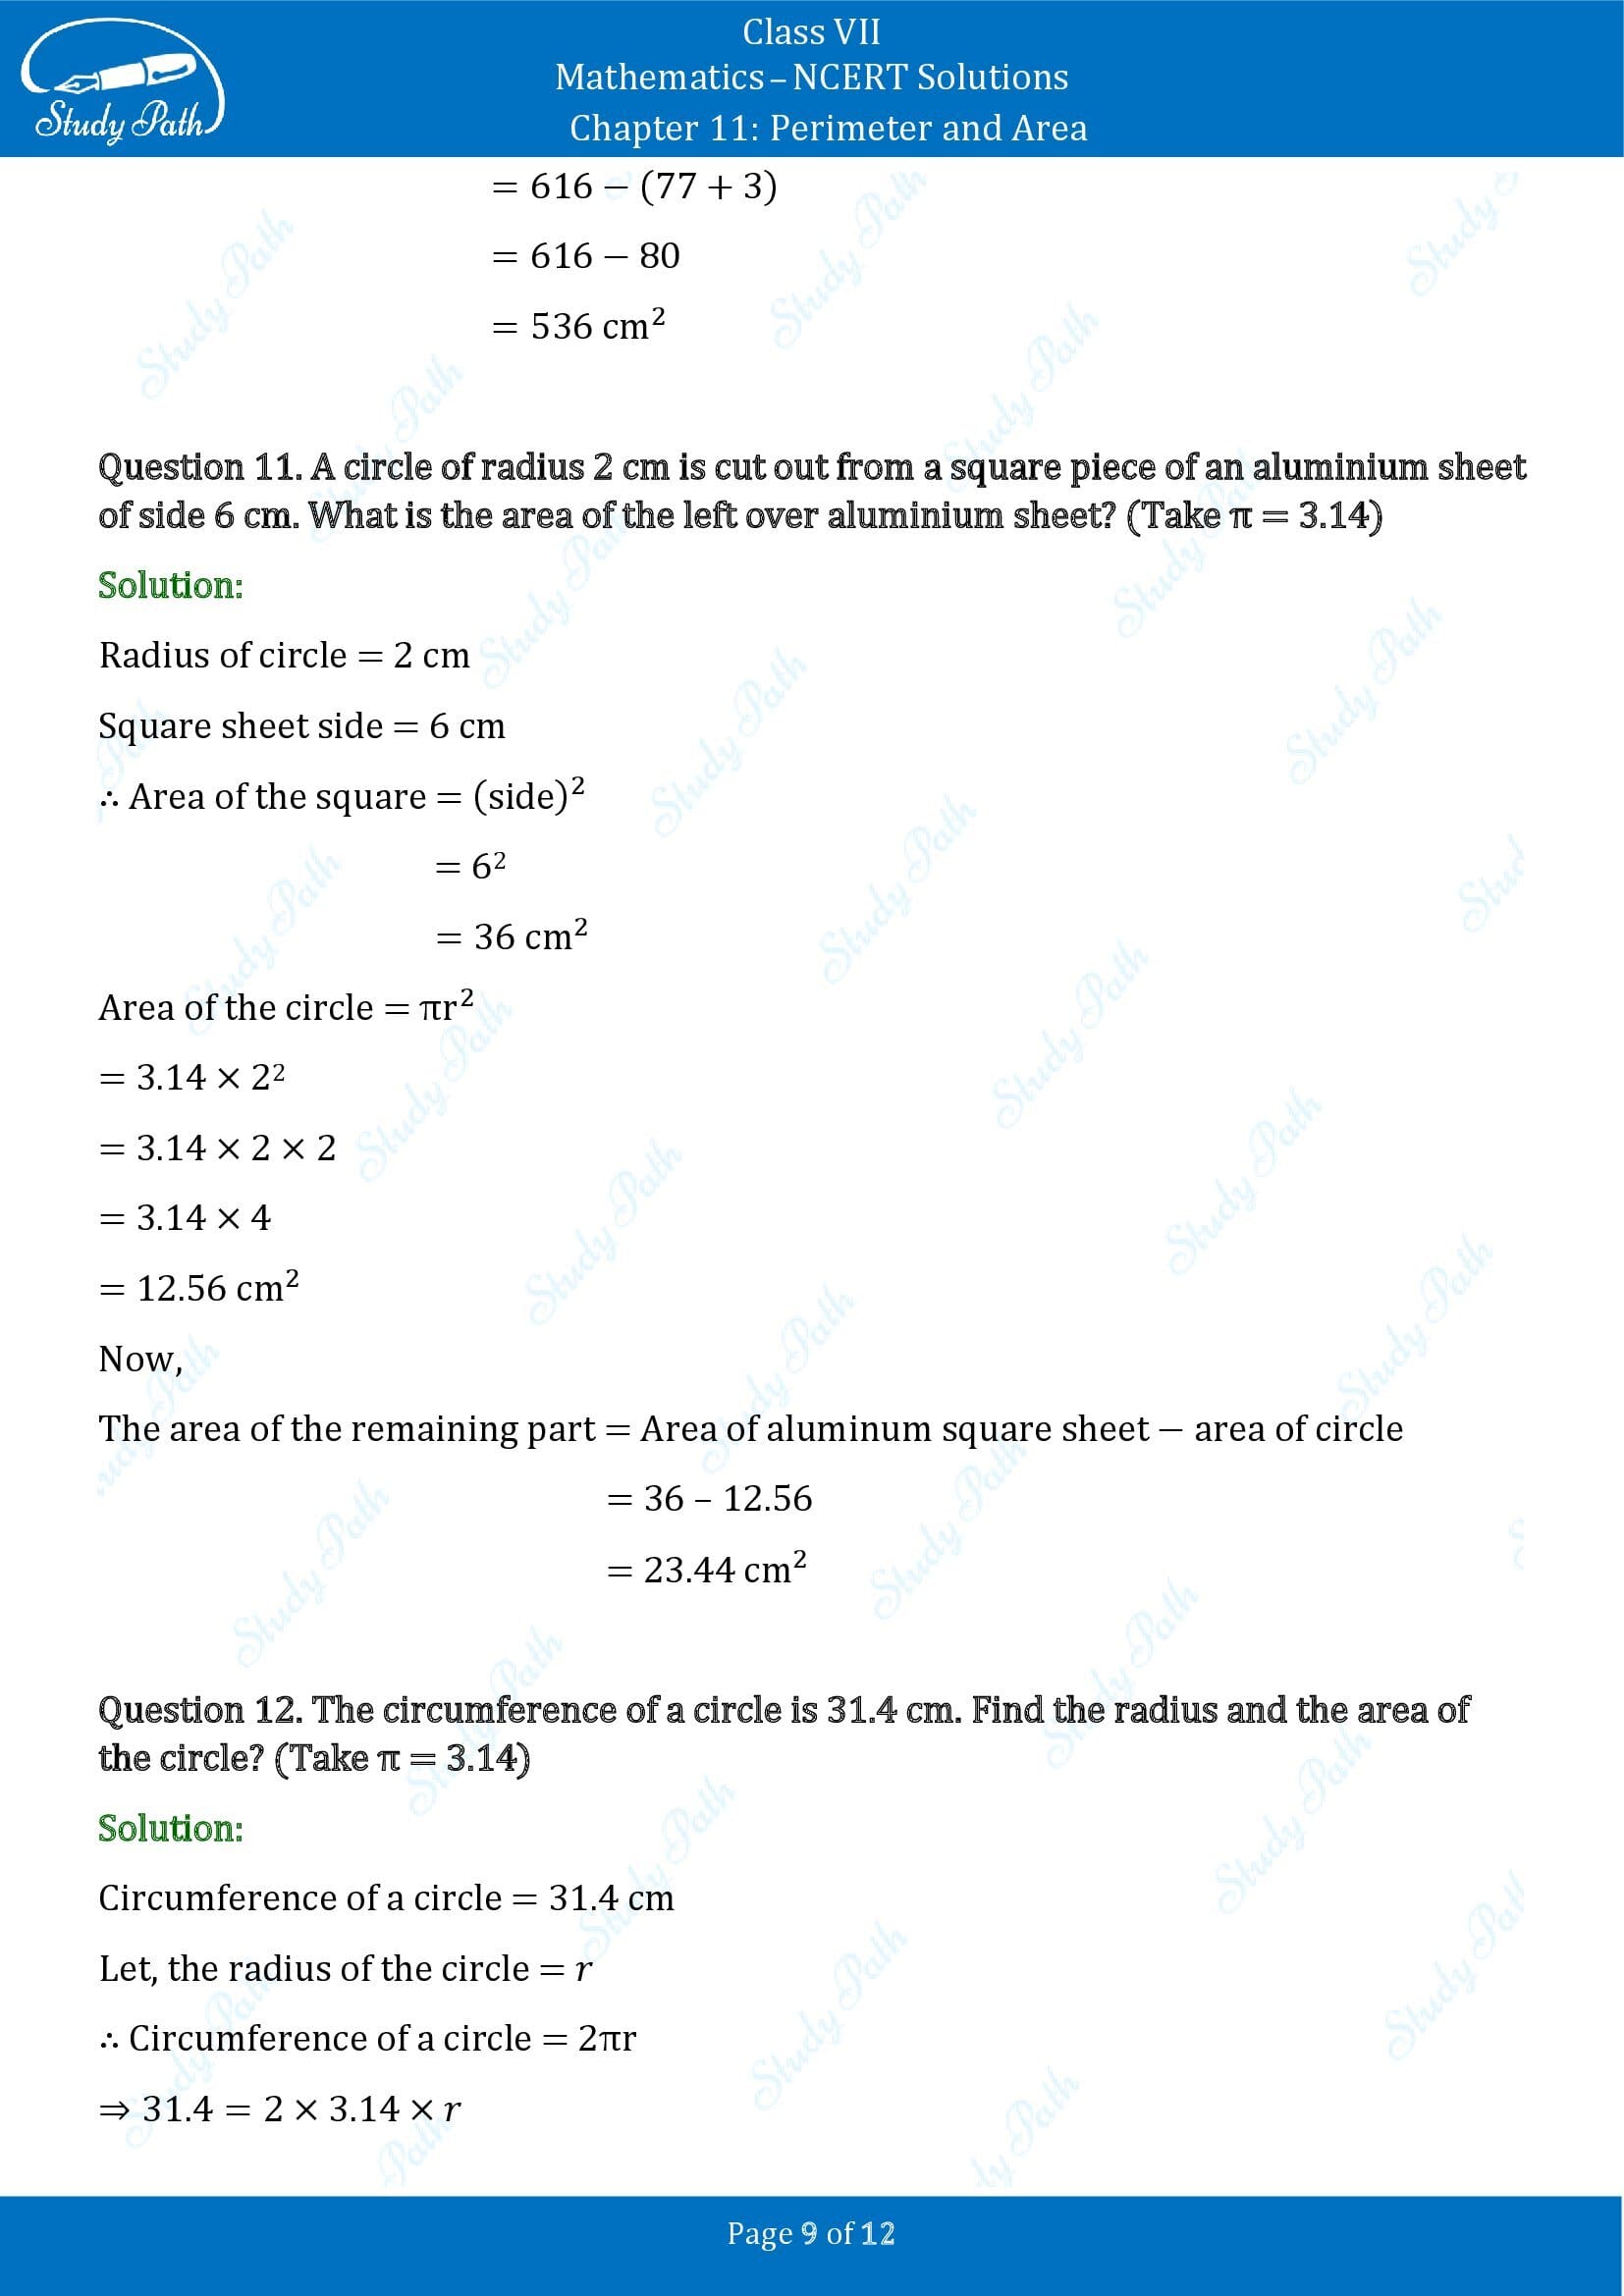 NCERT Solutions for Class 7 Maths Chapter 11 Perimeter and Area Exercise 11.3 00009